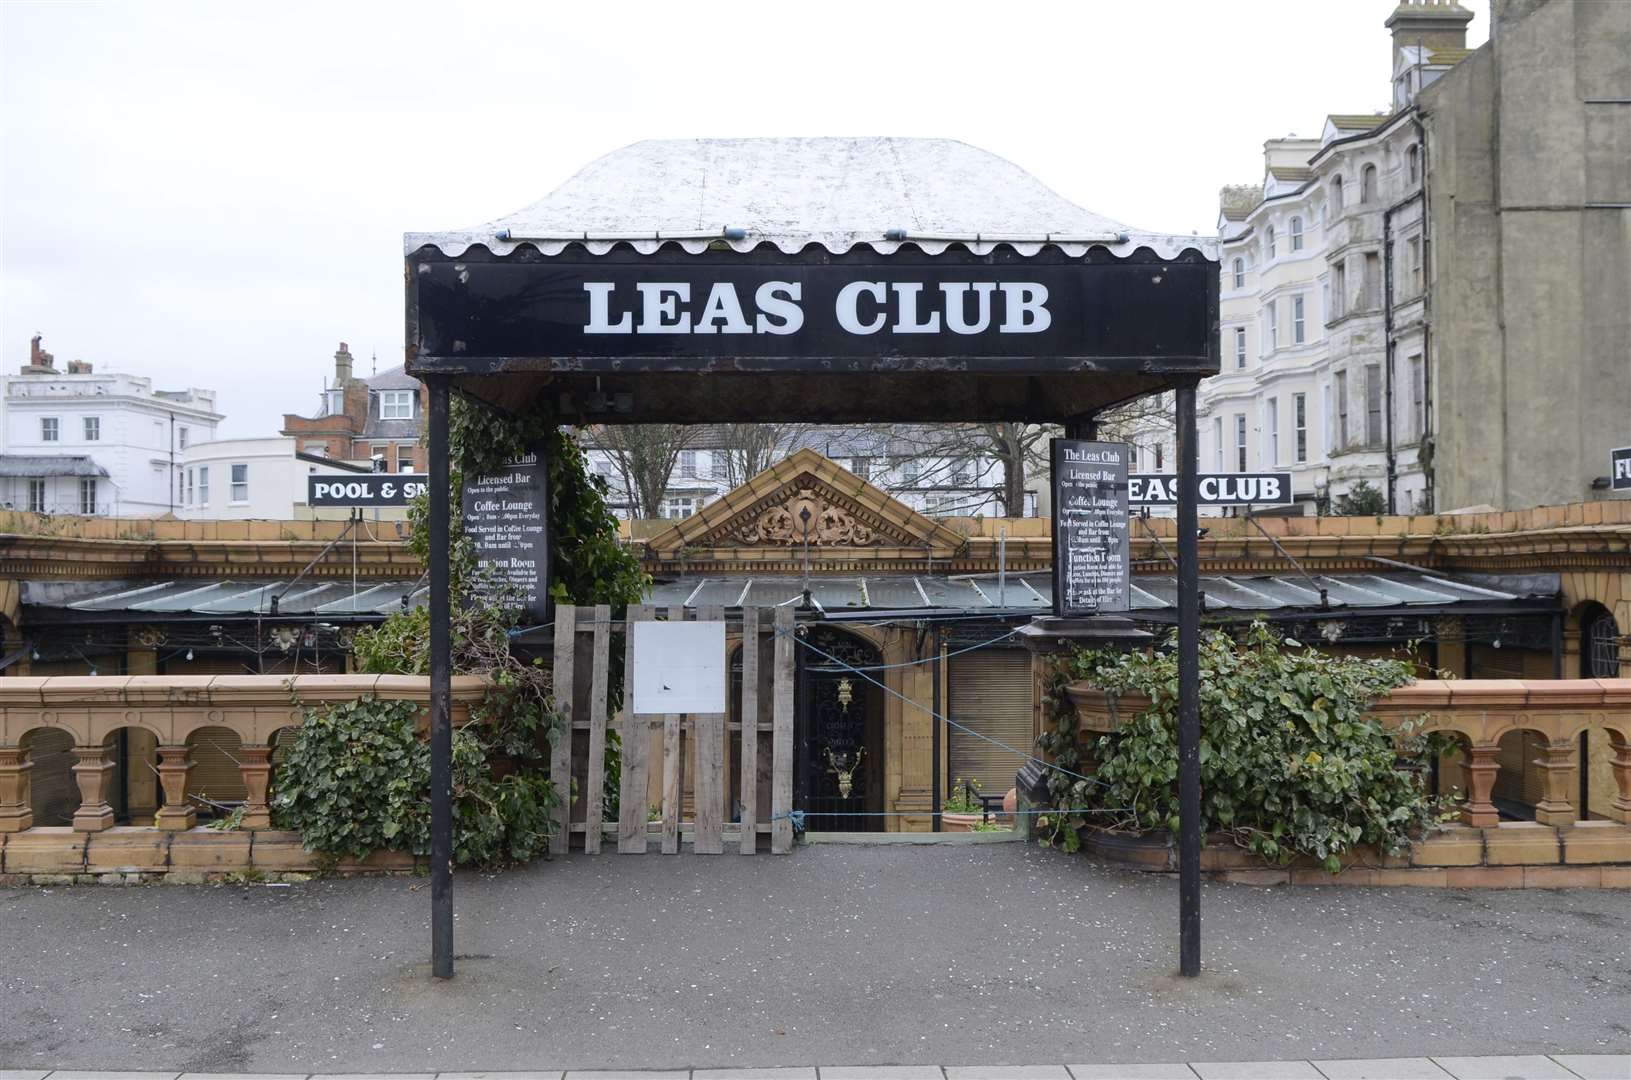 For many years, the site was known as the Leas Club - a hugely popular nightspot in Folkestone